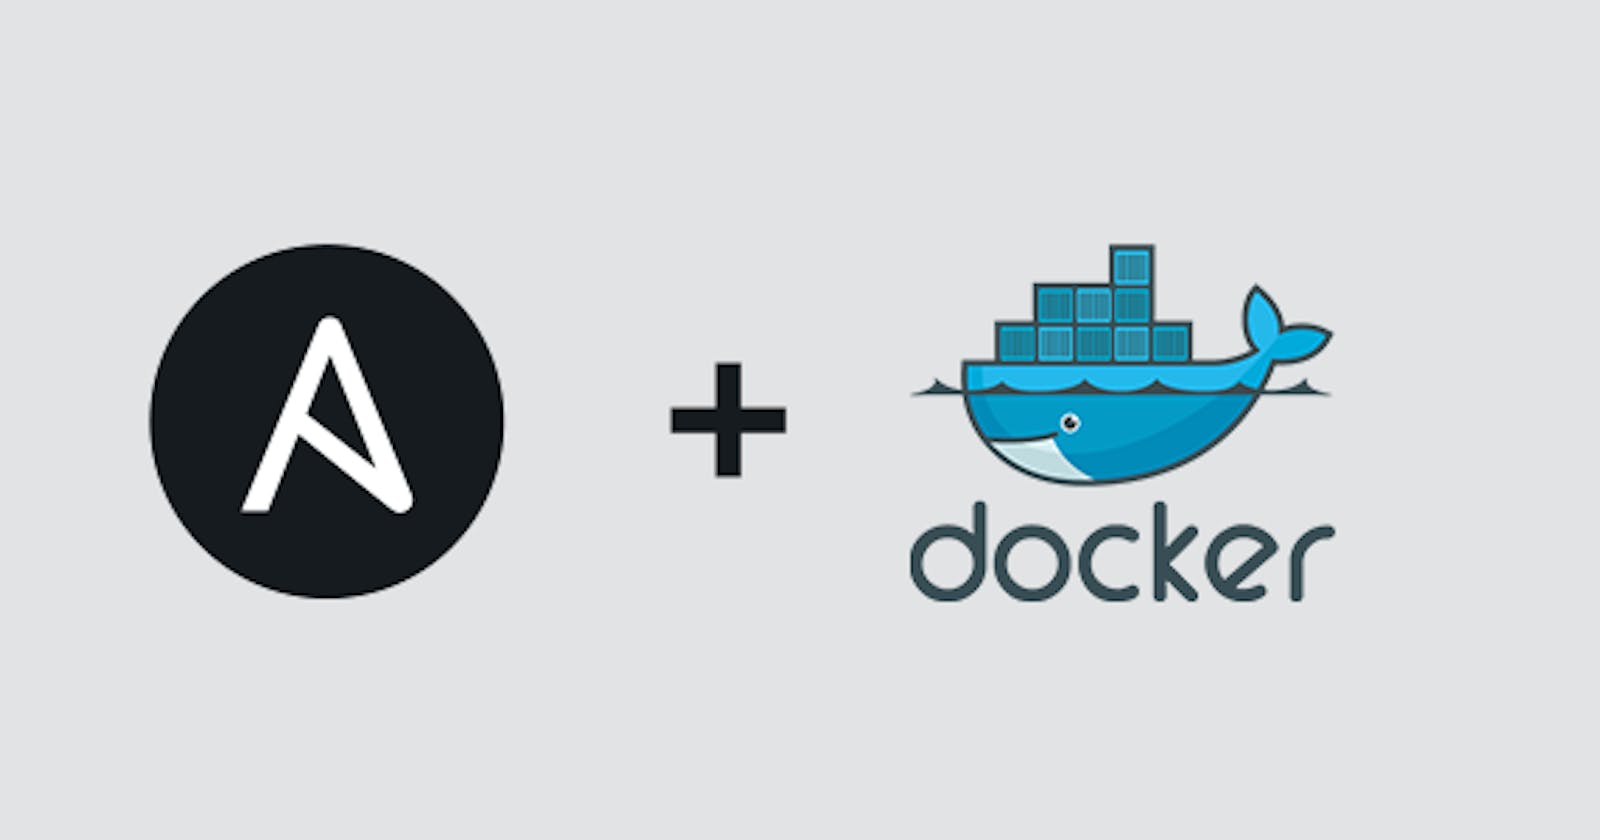 Webserver Configuration Inside Docker Container By Auto-Updating Ansible Inventory File